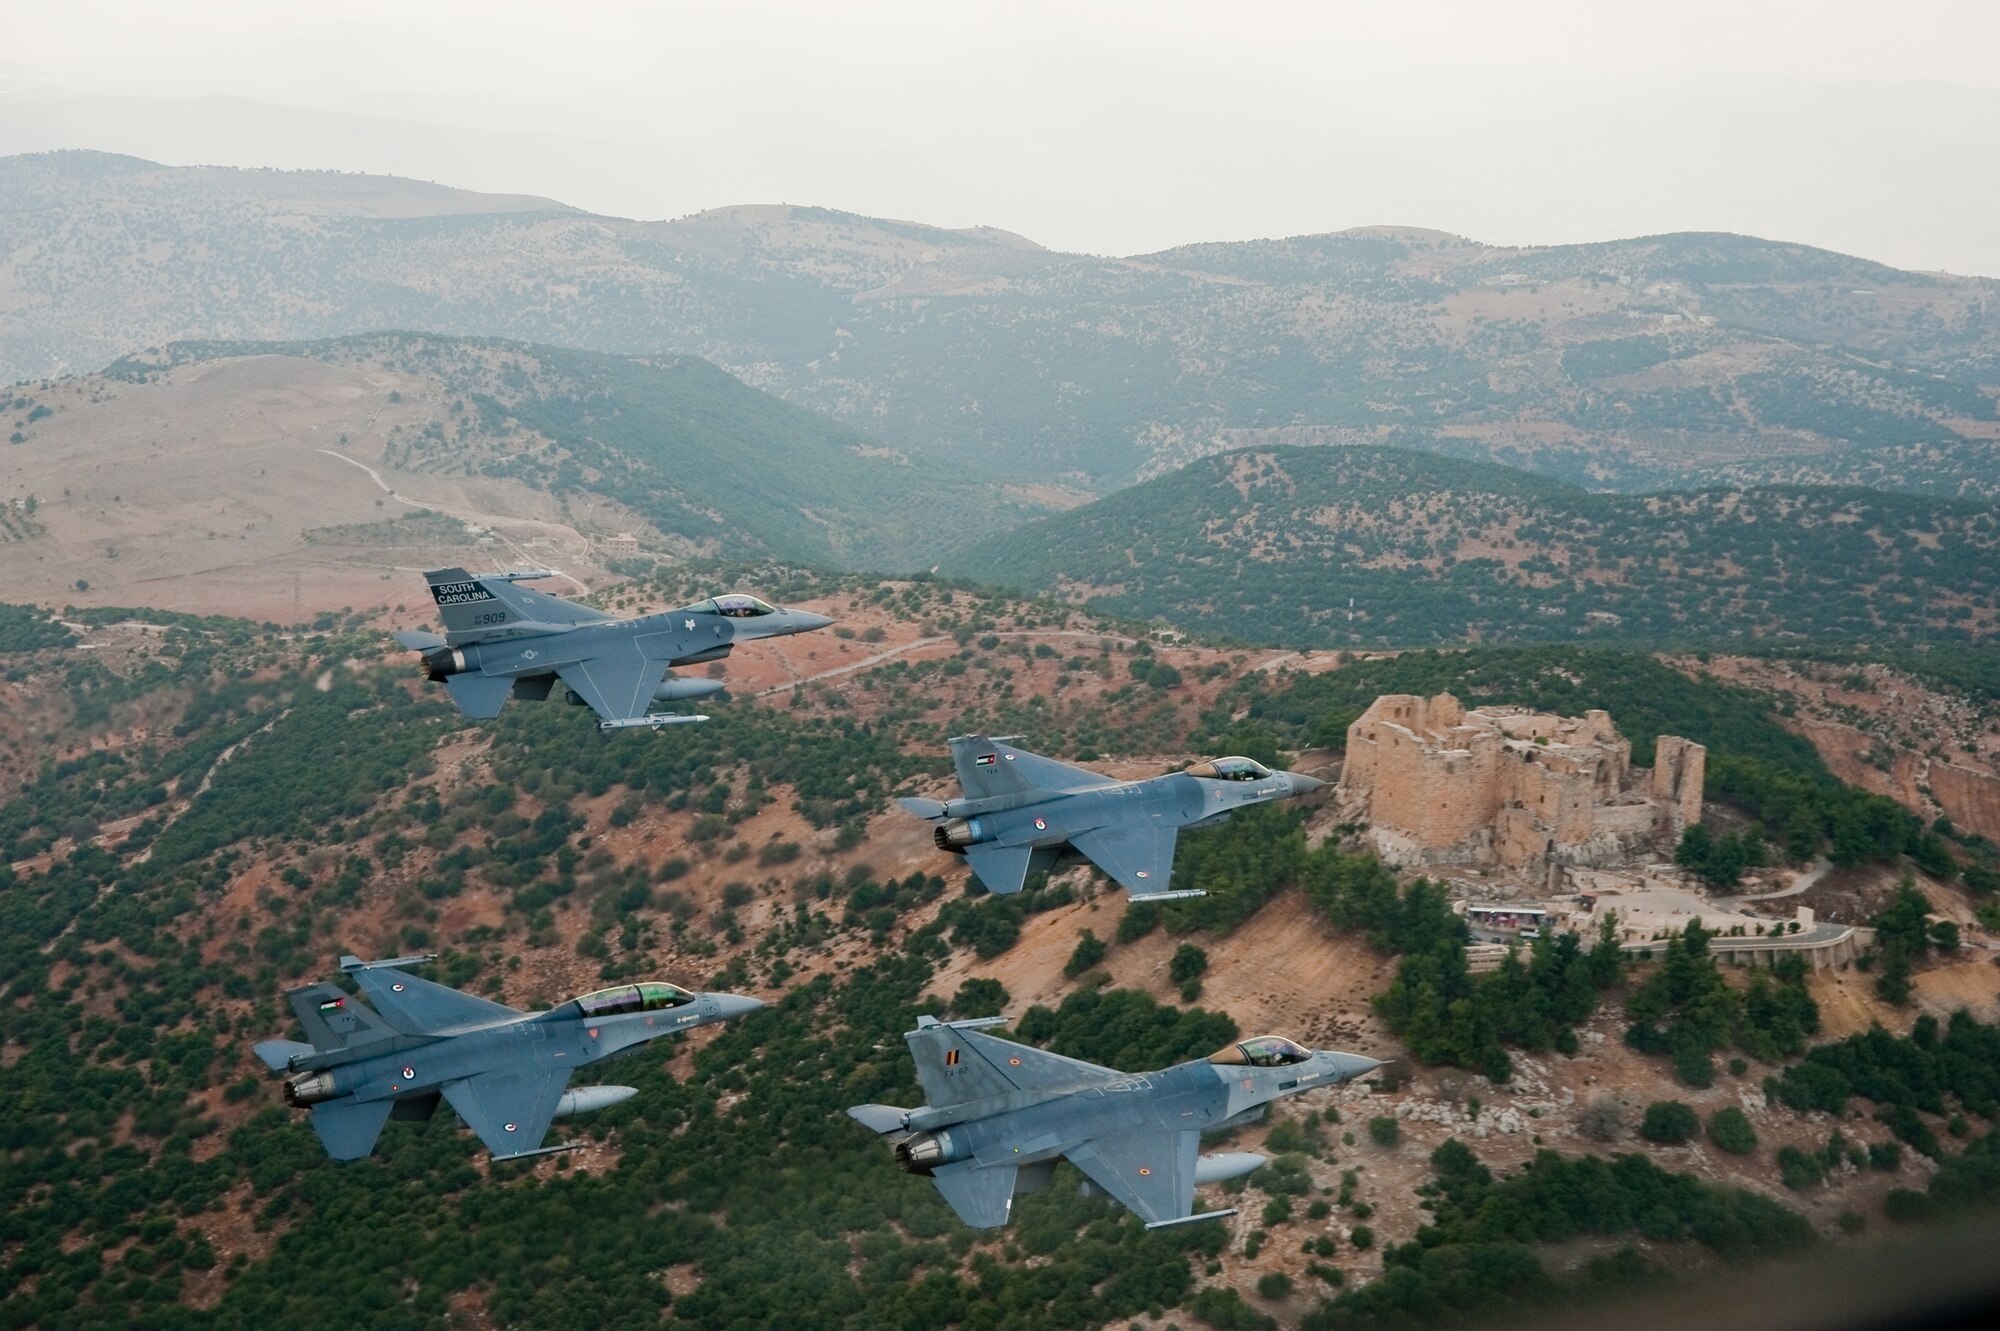 A diamond formation of F-16 Fighting Falcons flies over the ancient castle of Ajloun, located in Ajloun, Jordan, a site of 12th century Arab castle ruins, during a formation flight Nov. 1, 2009. The jets represent the three countries who were participating in the 2009 Falcon Air Meet: Belgium, United States, and Jordan. The Falcon Air Meet is an annual competition for countries around the world that fly F-16 Fighting Falcons. (Official U.S. Air Force photo by Capt. Darin Overstreet, Colorado National Guard/Released)